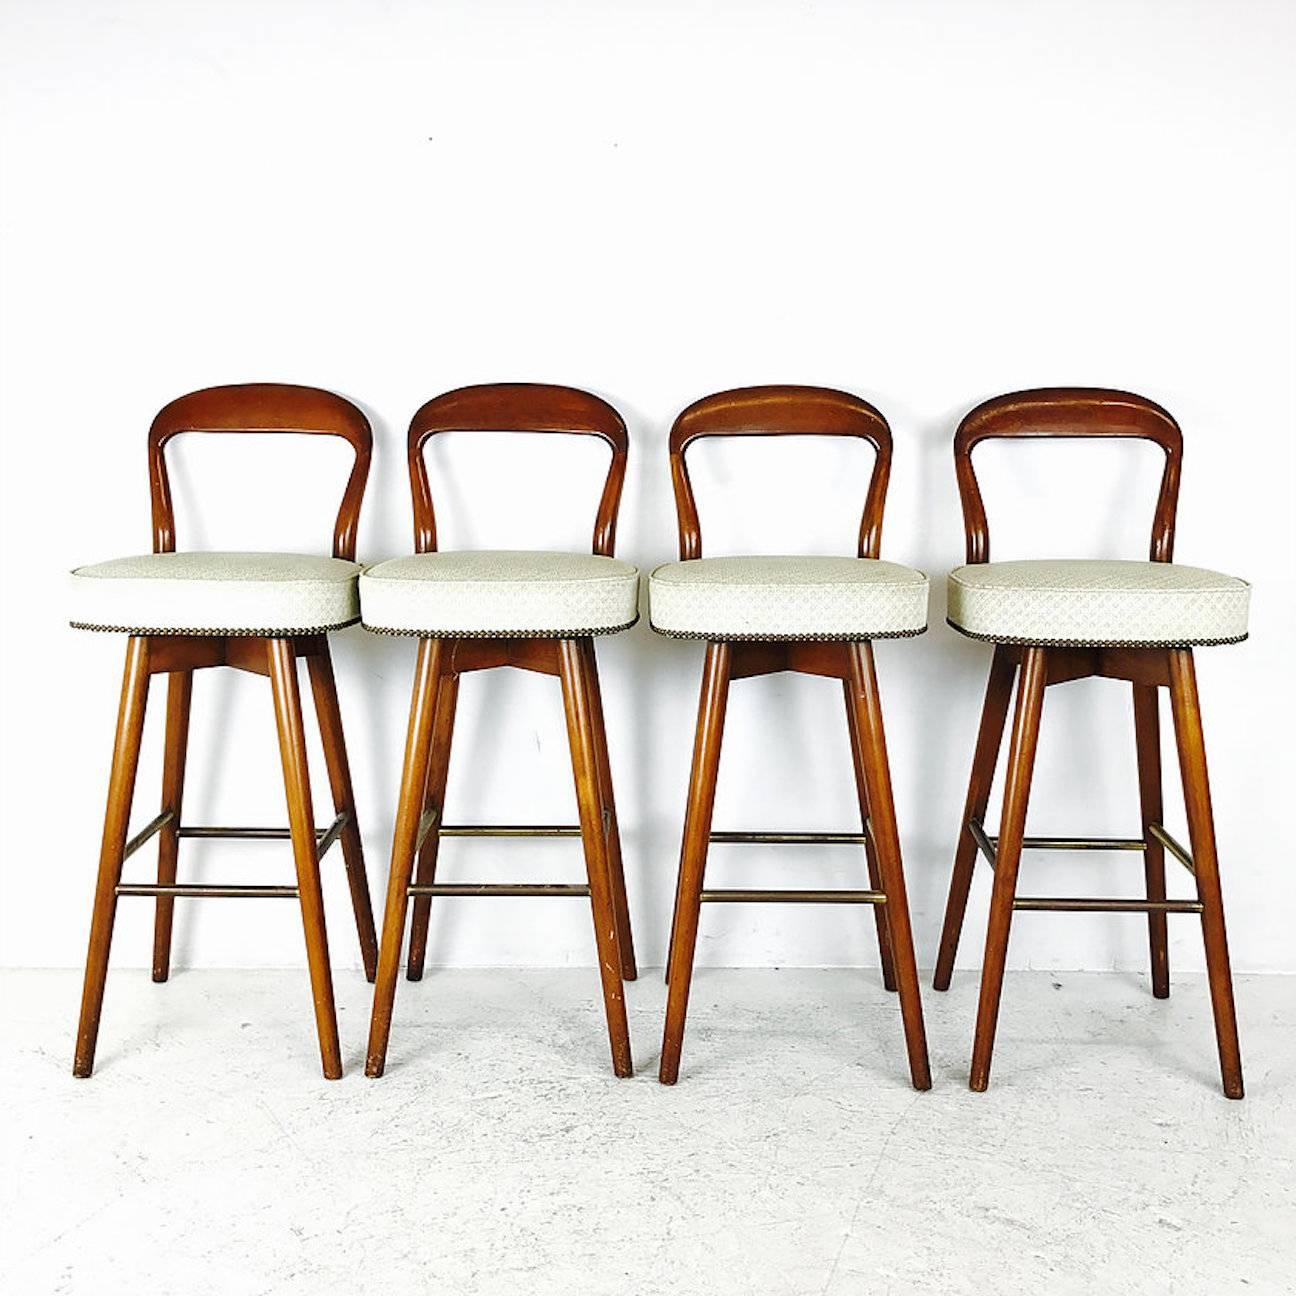 Set of four MCM bar stools in the style of Edward Wormley. Stylish open back bar stools with brass-plated footrest. Stools need refinishing and new upholstery, circa 1960s

dimensions: 17